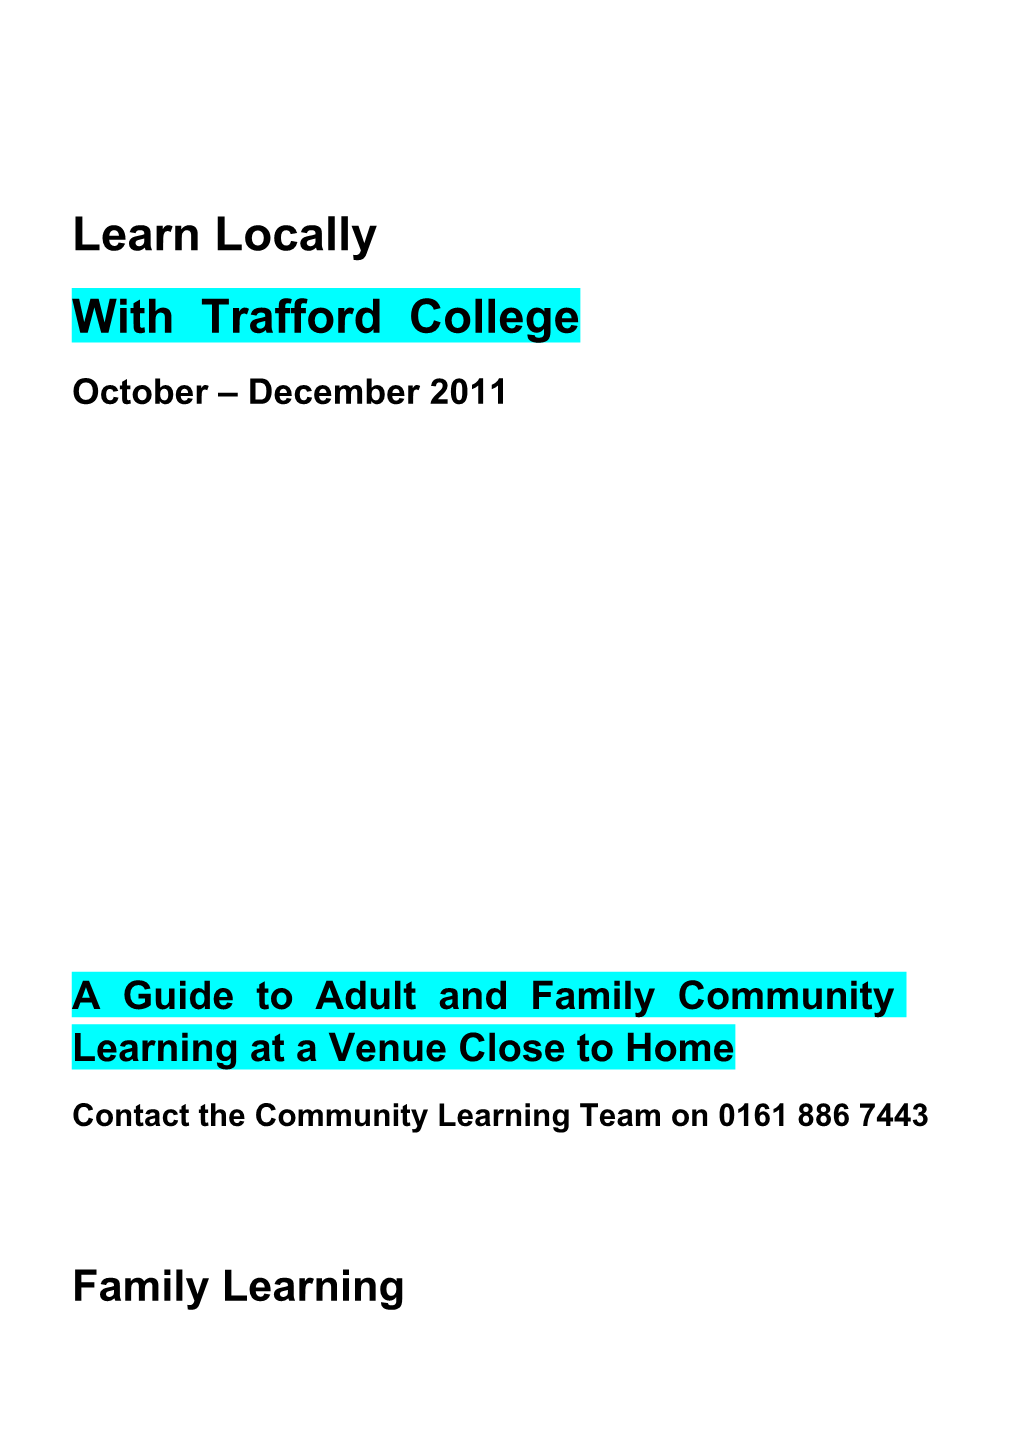 A Guide to Adult and Family Community Learning at a Venue Close Tohome